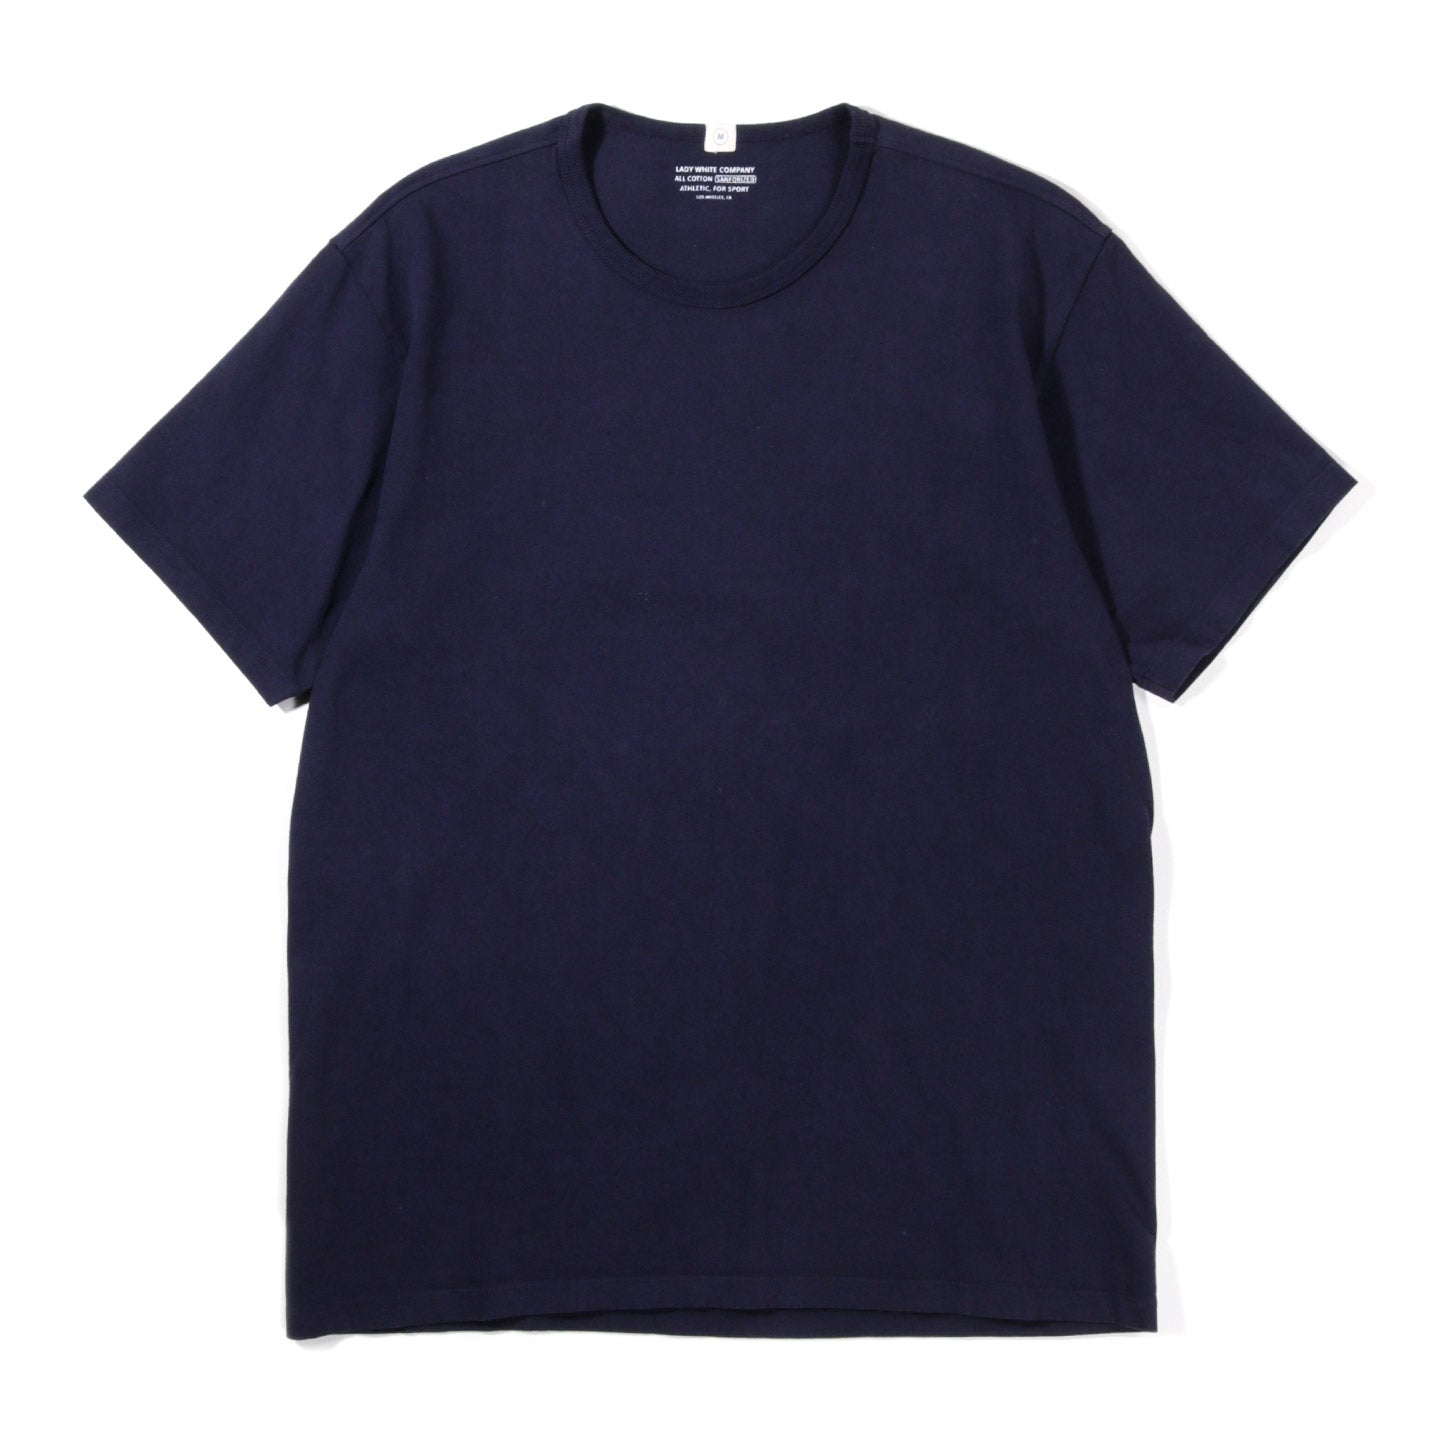 LADY WHITE CO. T-SHIRT 2-PACK NAVY